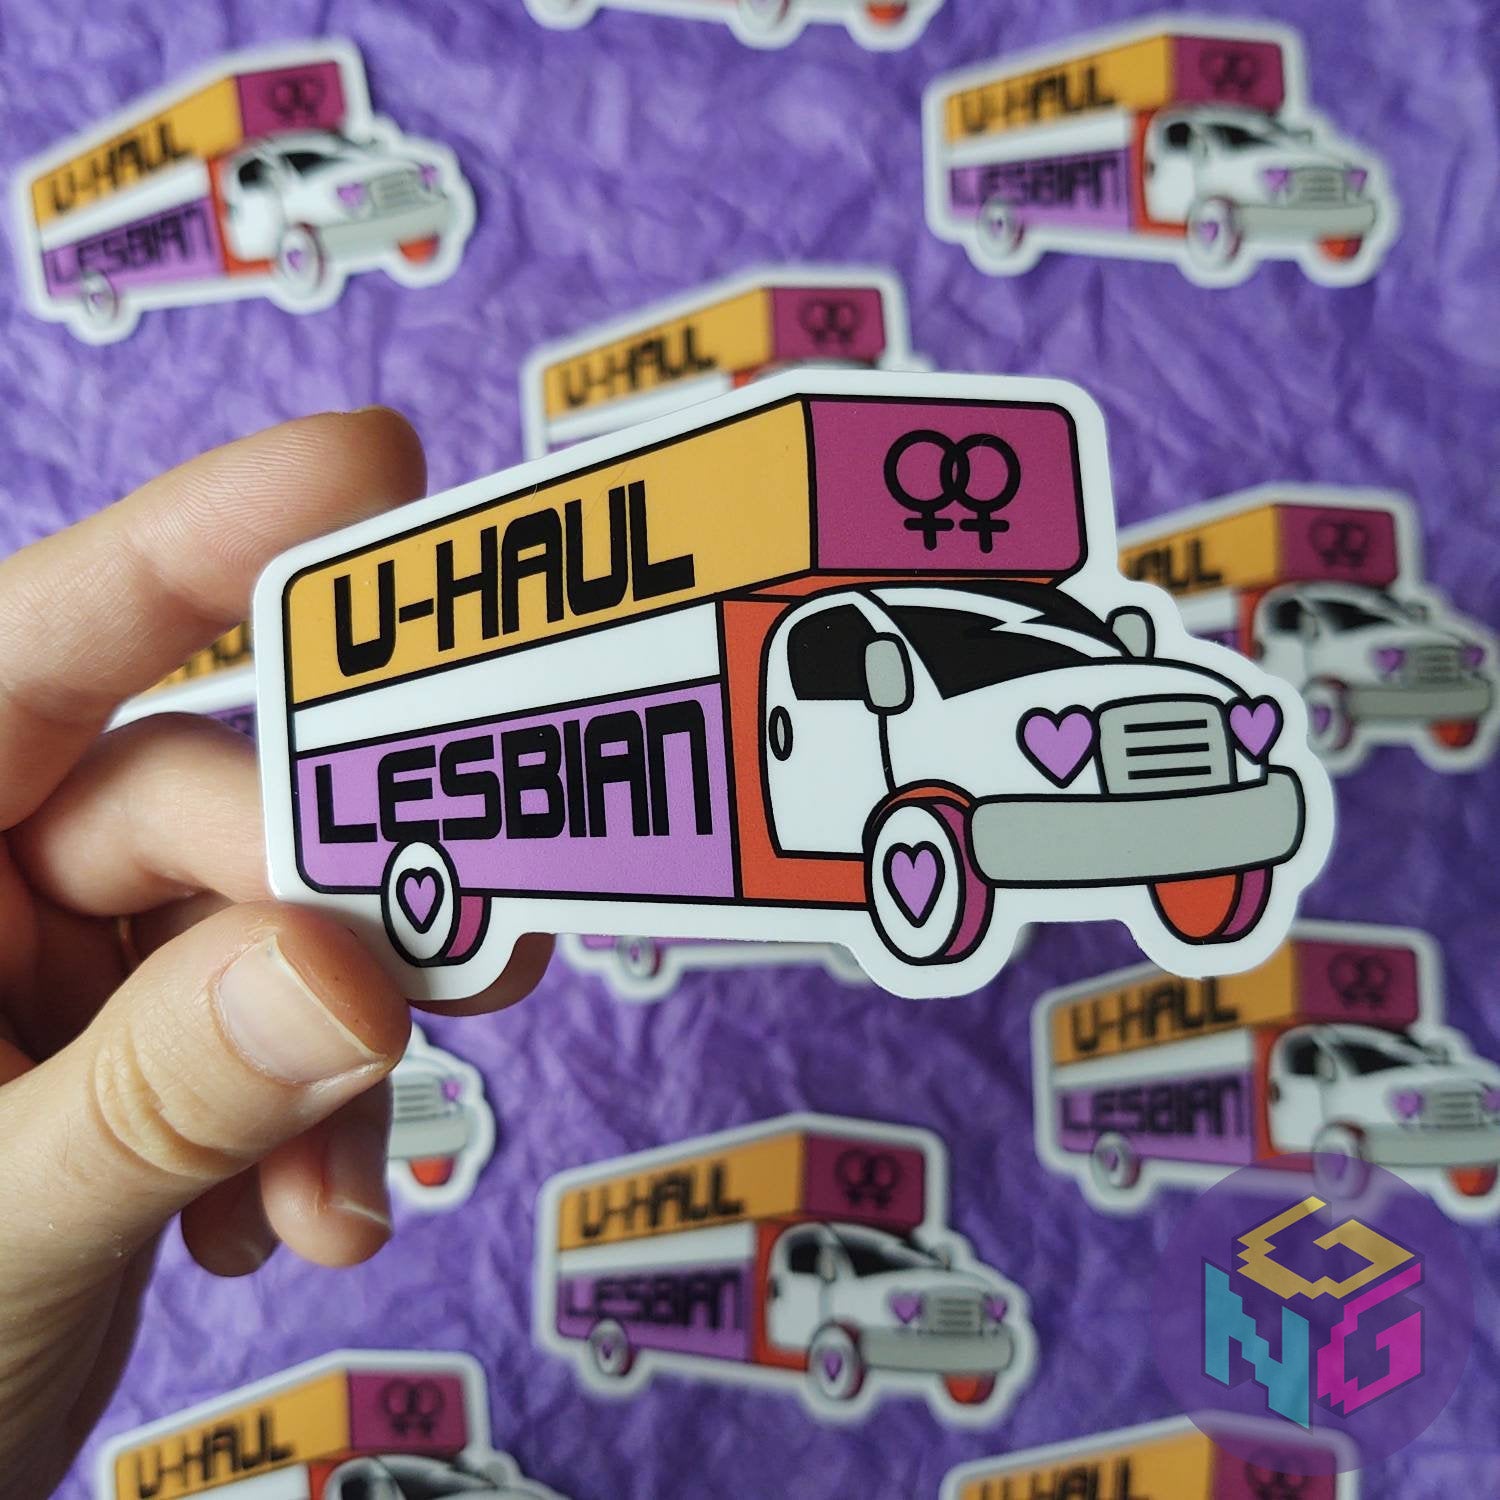 hand holding uhaul lesbian sticker in front of more u-haul lesbian stickers on purple background